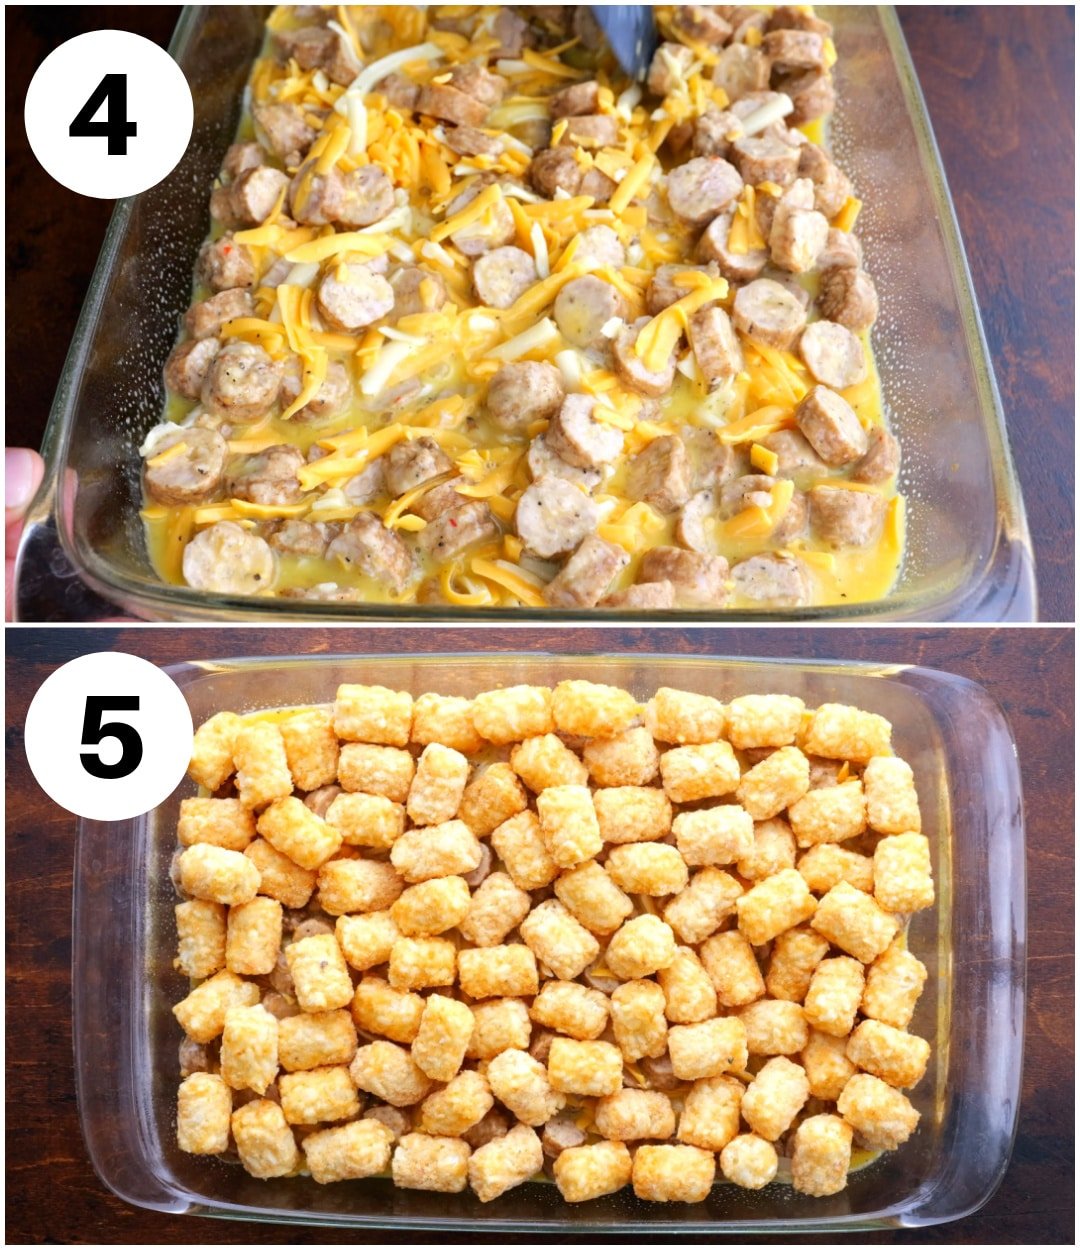 Egg mixture added to baking dish and tater tots place on top.